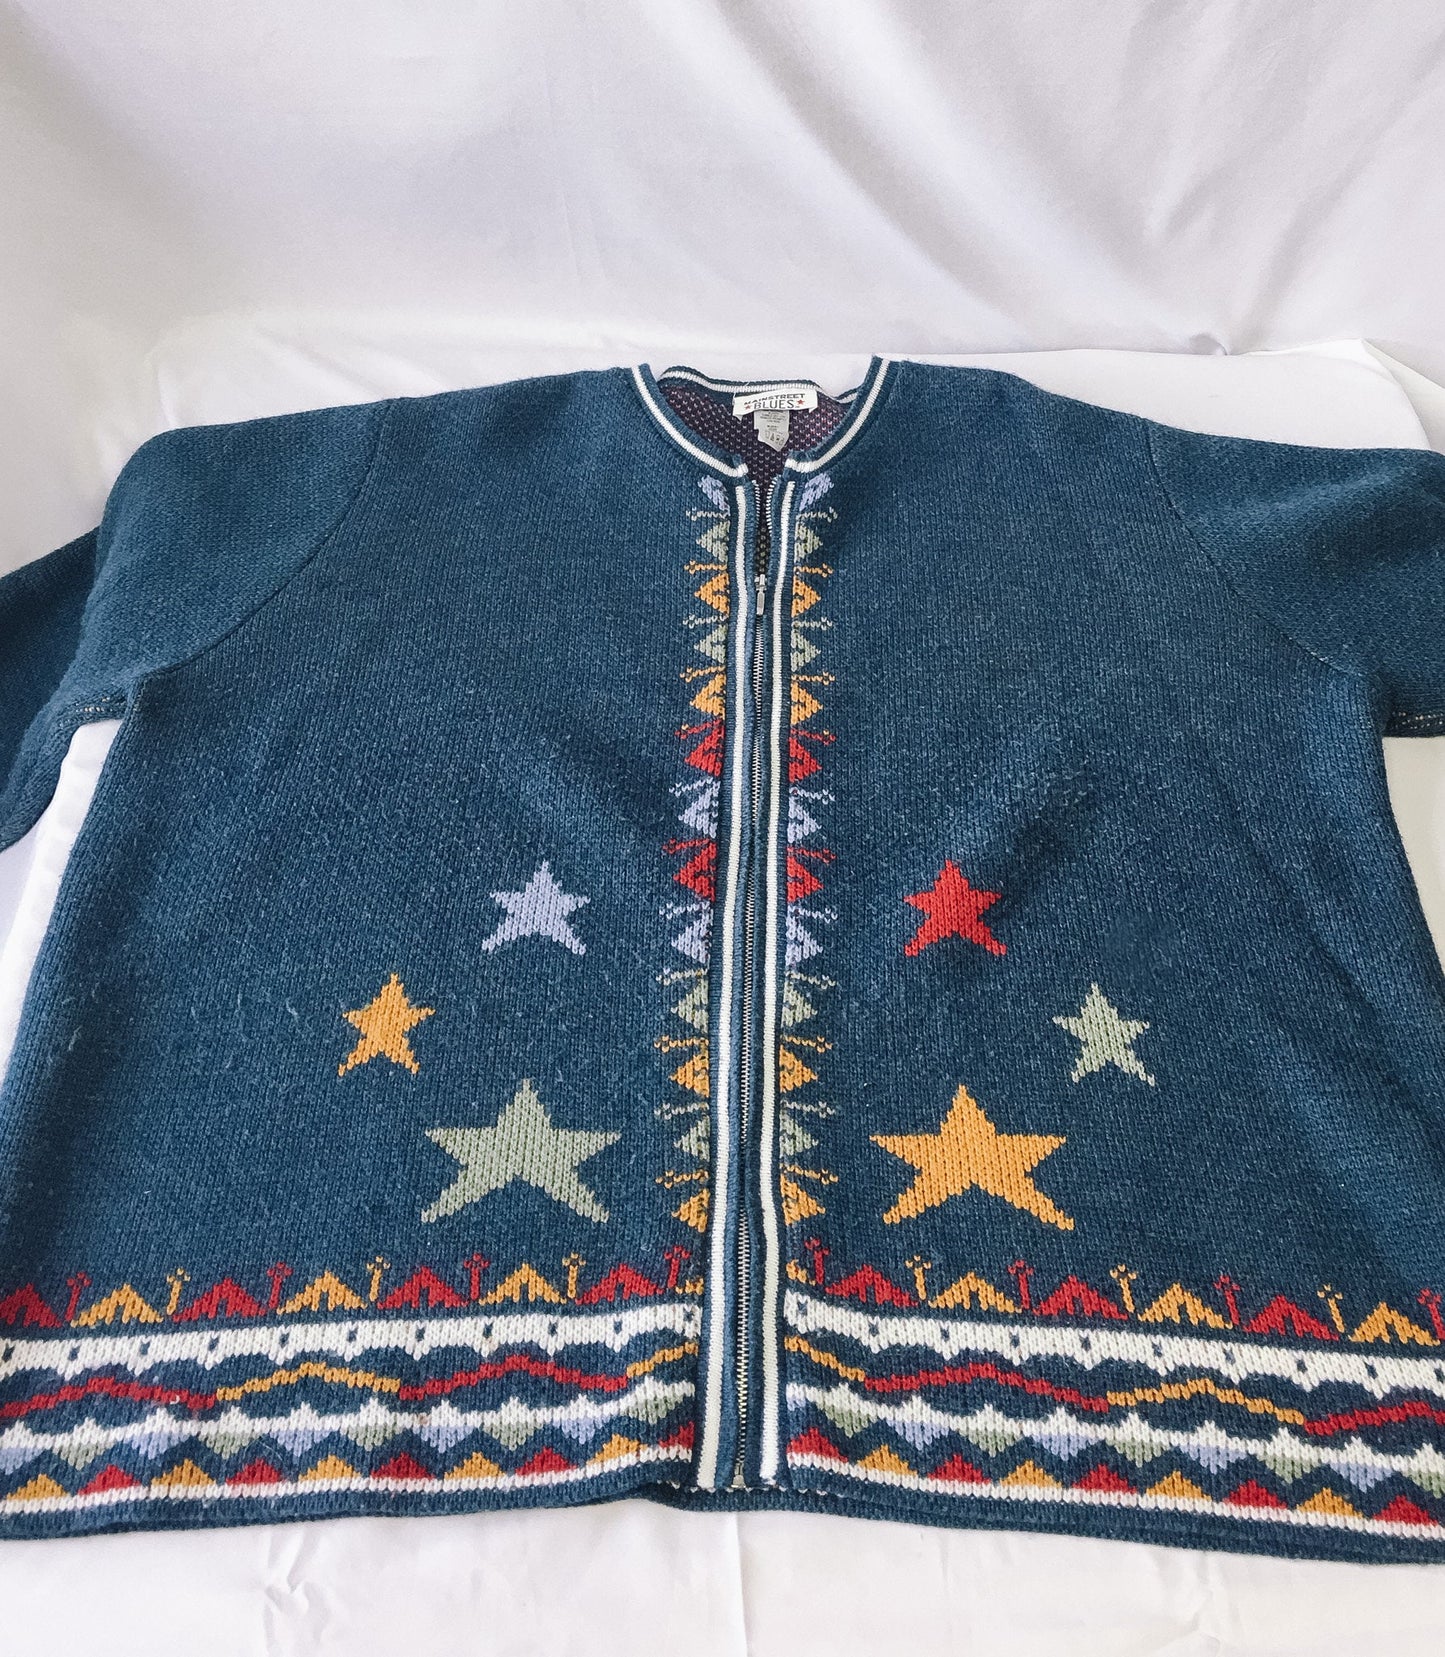 Vintage Mainstreet Blues Blue Star Holiday Patterned Zip Up Sweater